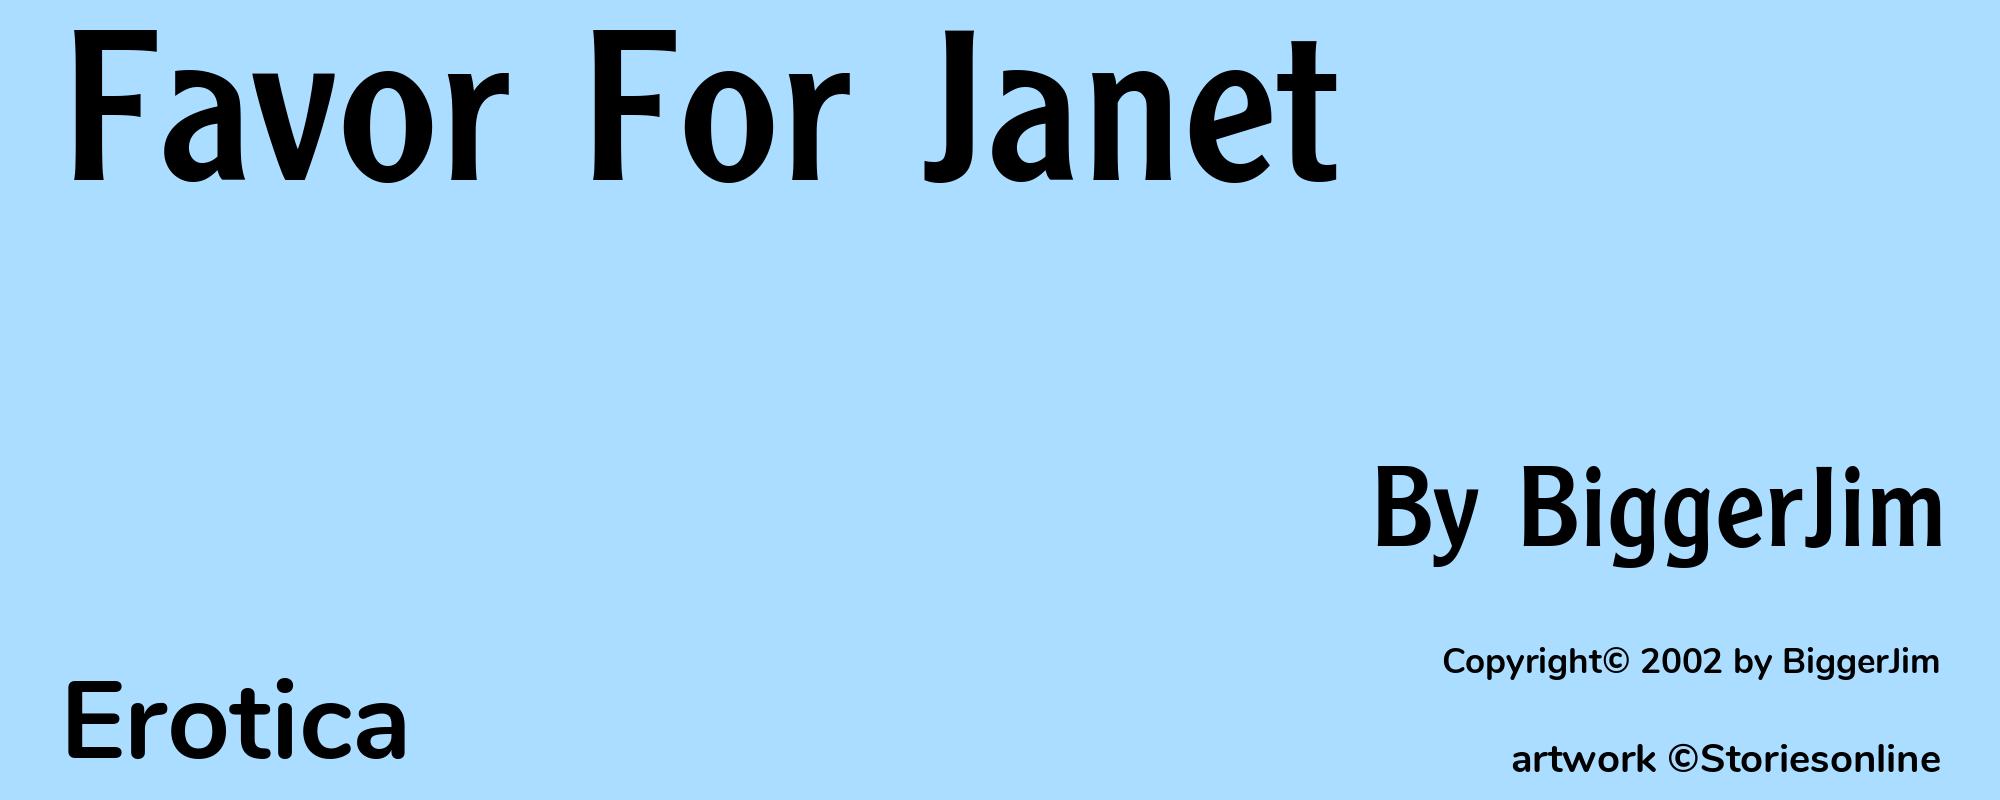 Favor For Janet - Cover